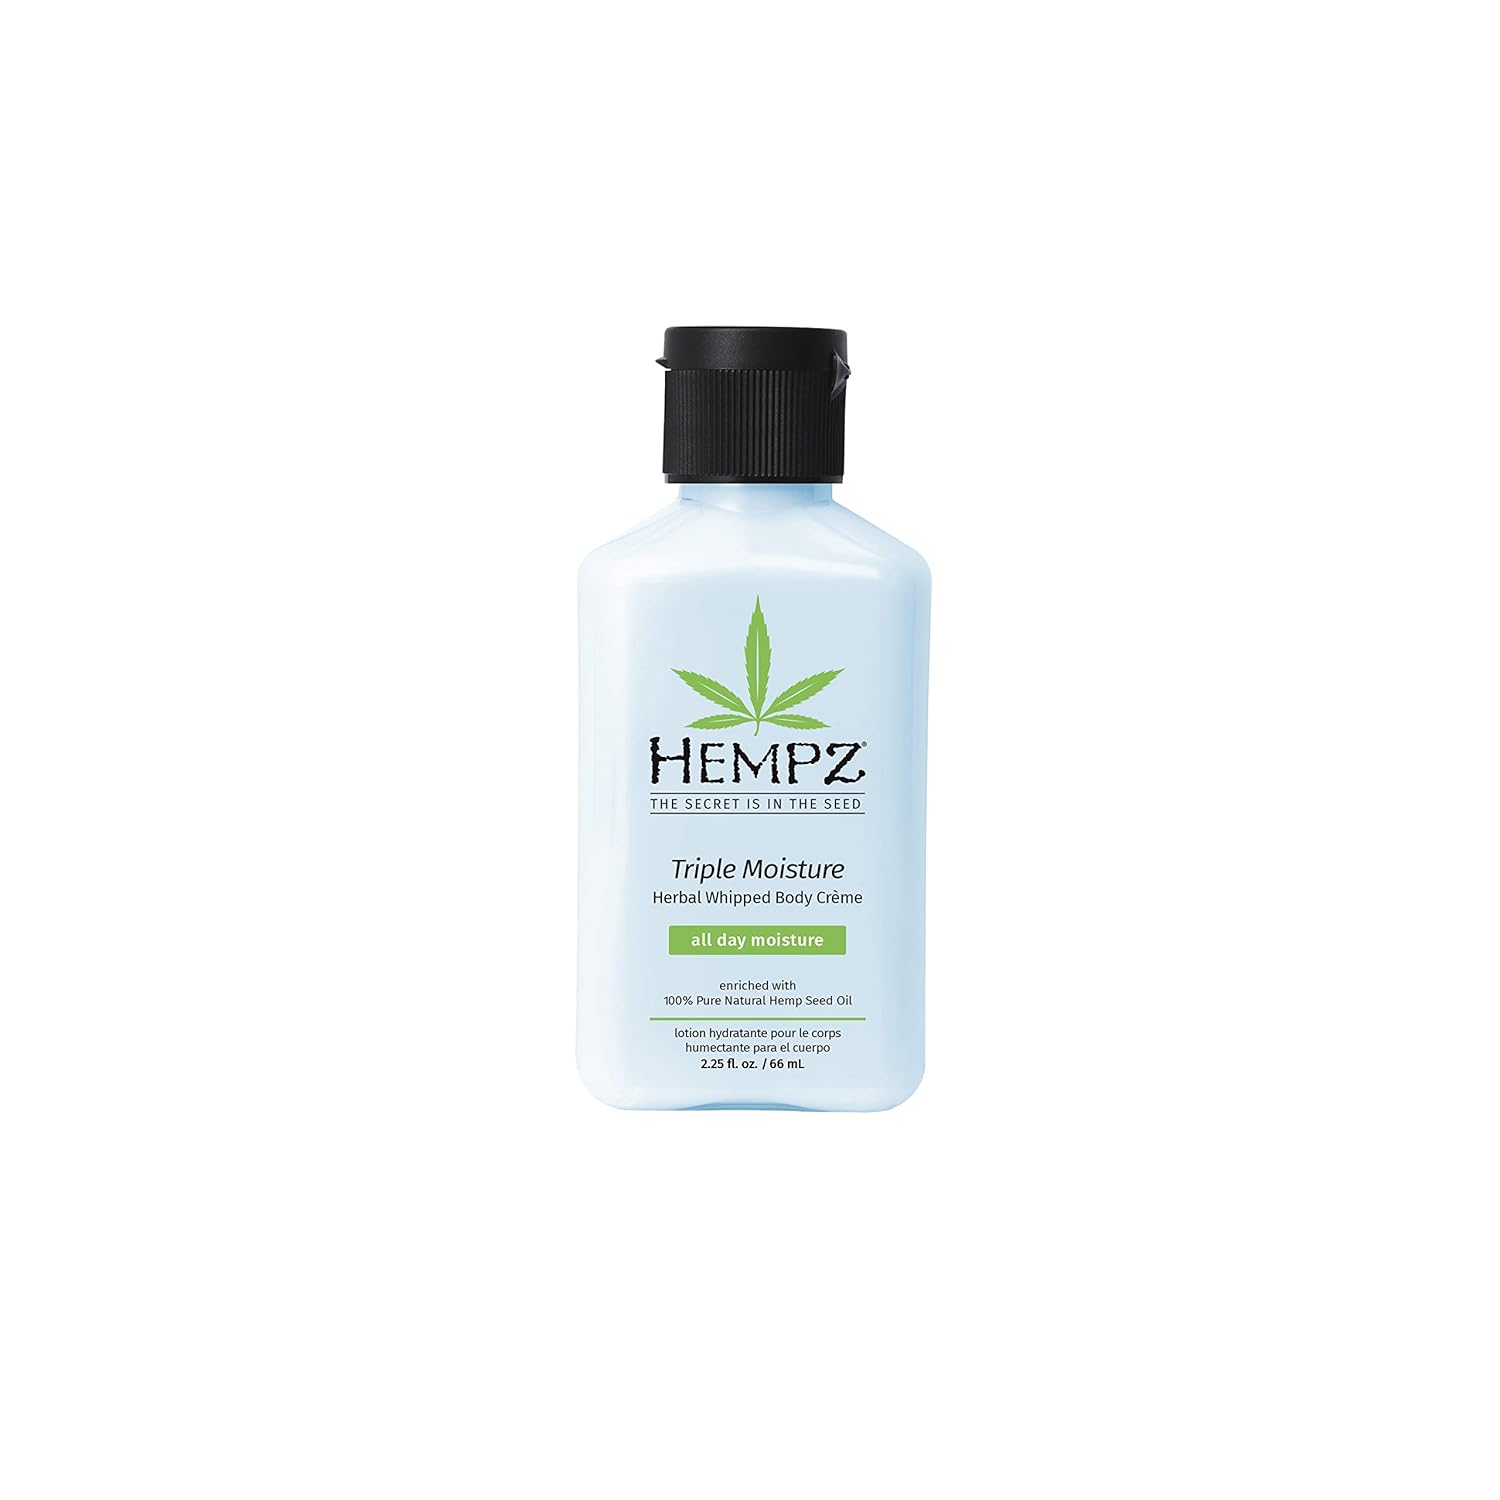 Hempz Natural Triple Moisture Herbal Whipped Body Creme with 100% Pure Hemp Seed Oil for 24-Hour Hydration - Moisturizing Vegan Skin Lotion with Yangu Oil, Peach and Grapefruit - Enriched Moisturizer